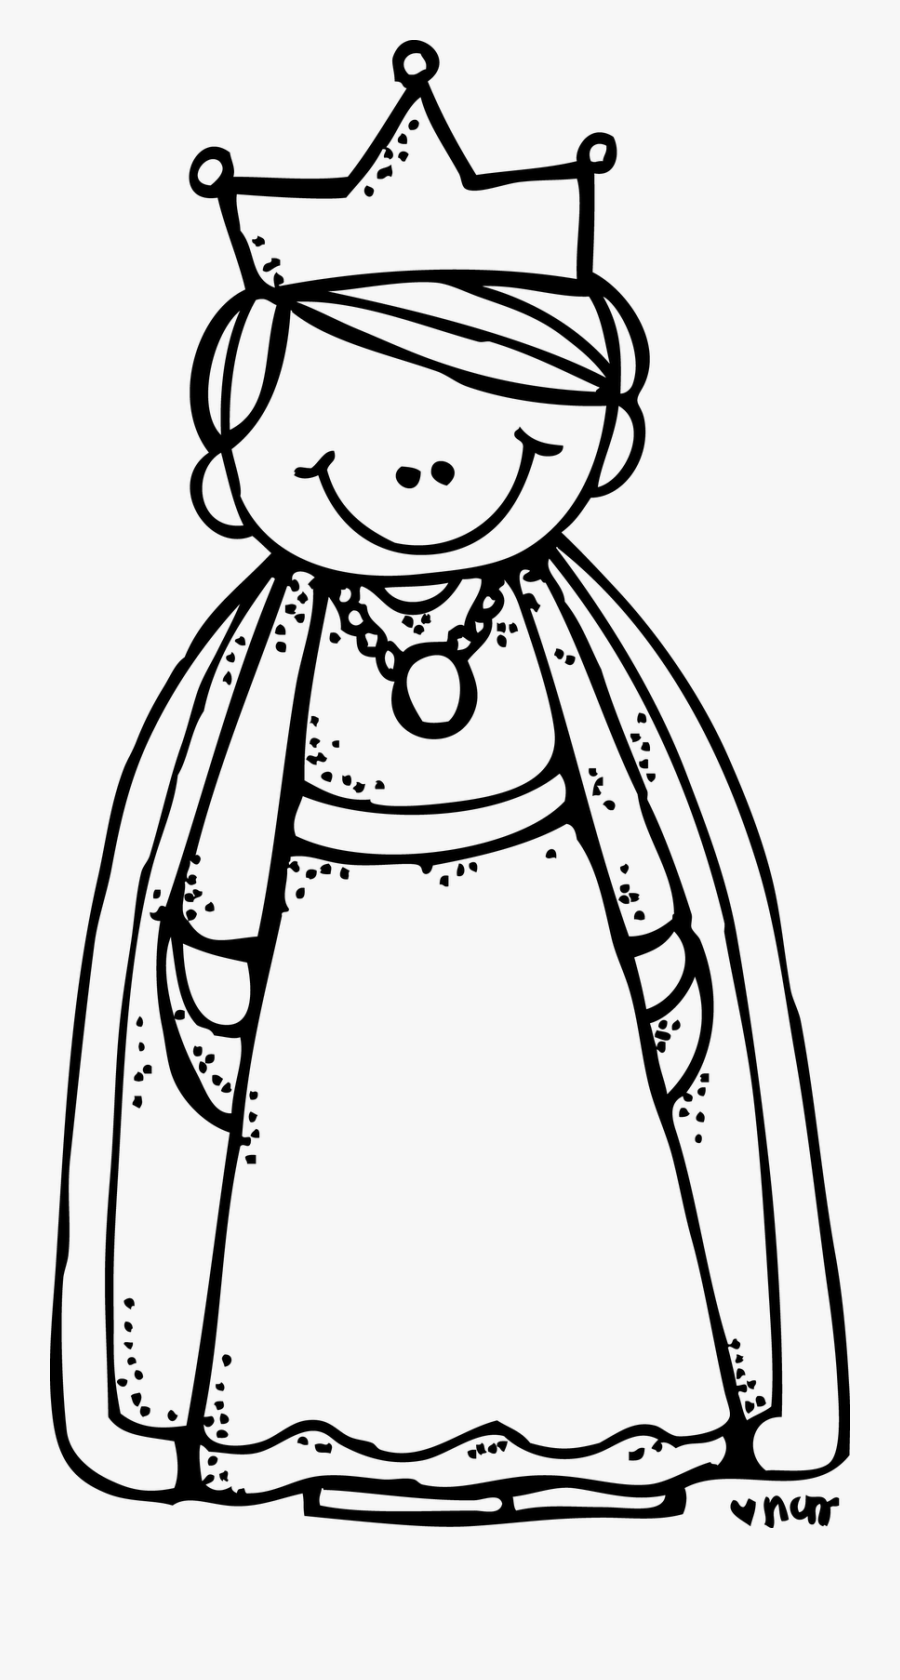 Black And White October Clipart - Queen Clip Art Black And White, Transparent Clipart